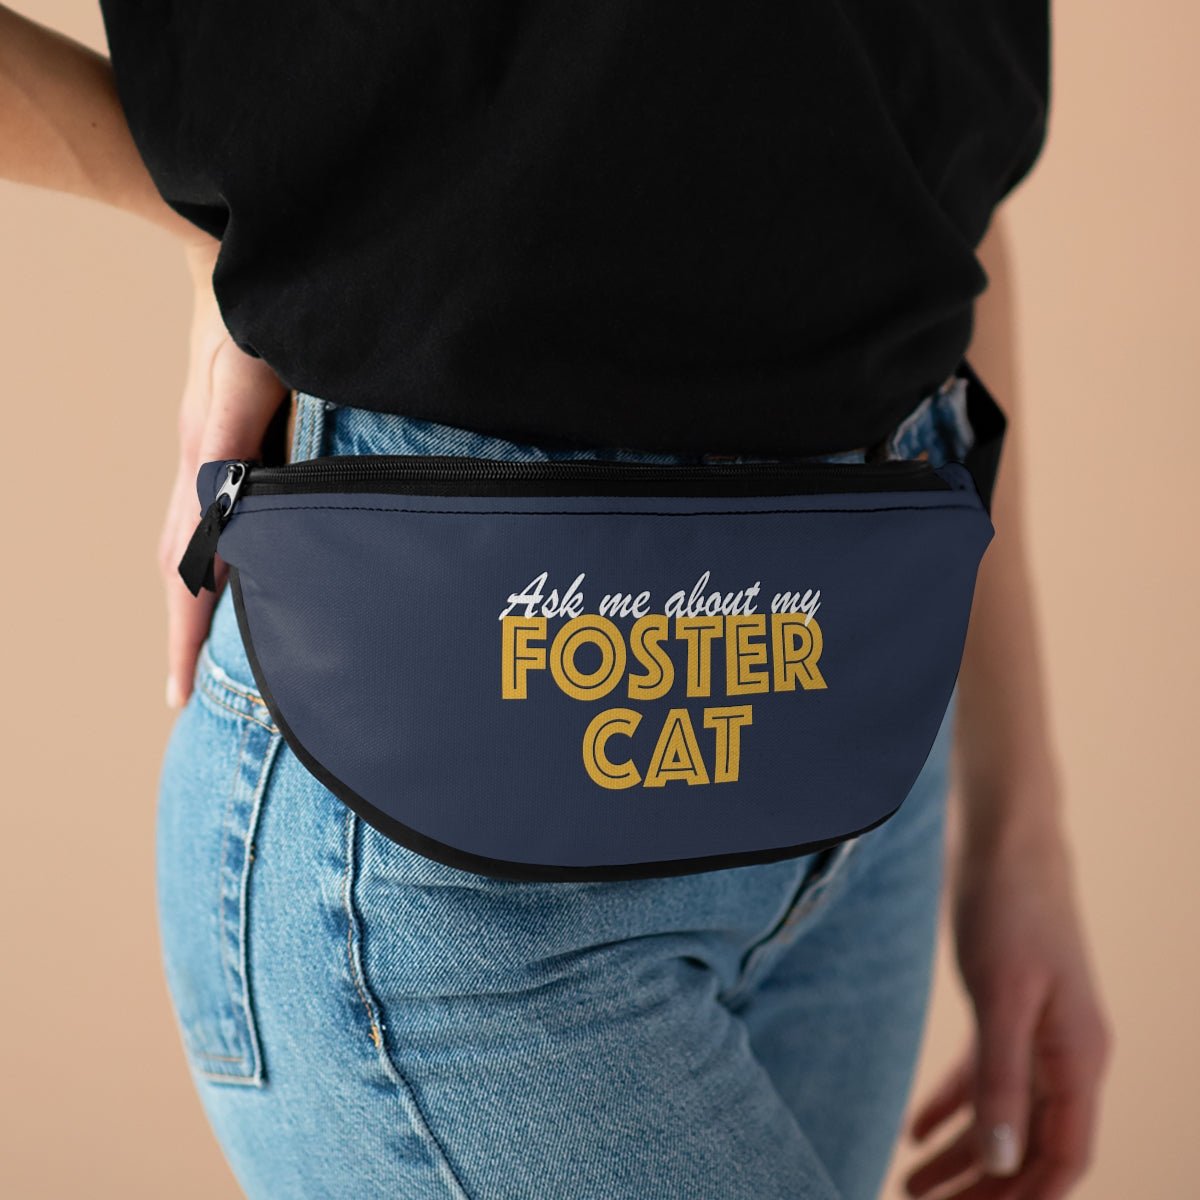 Ask Me About My Foster Cat | Fanny Pack - Detezi Designs-11286266457658903210